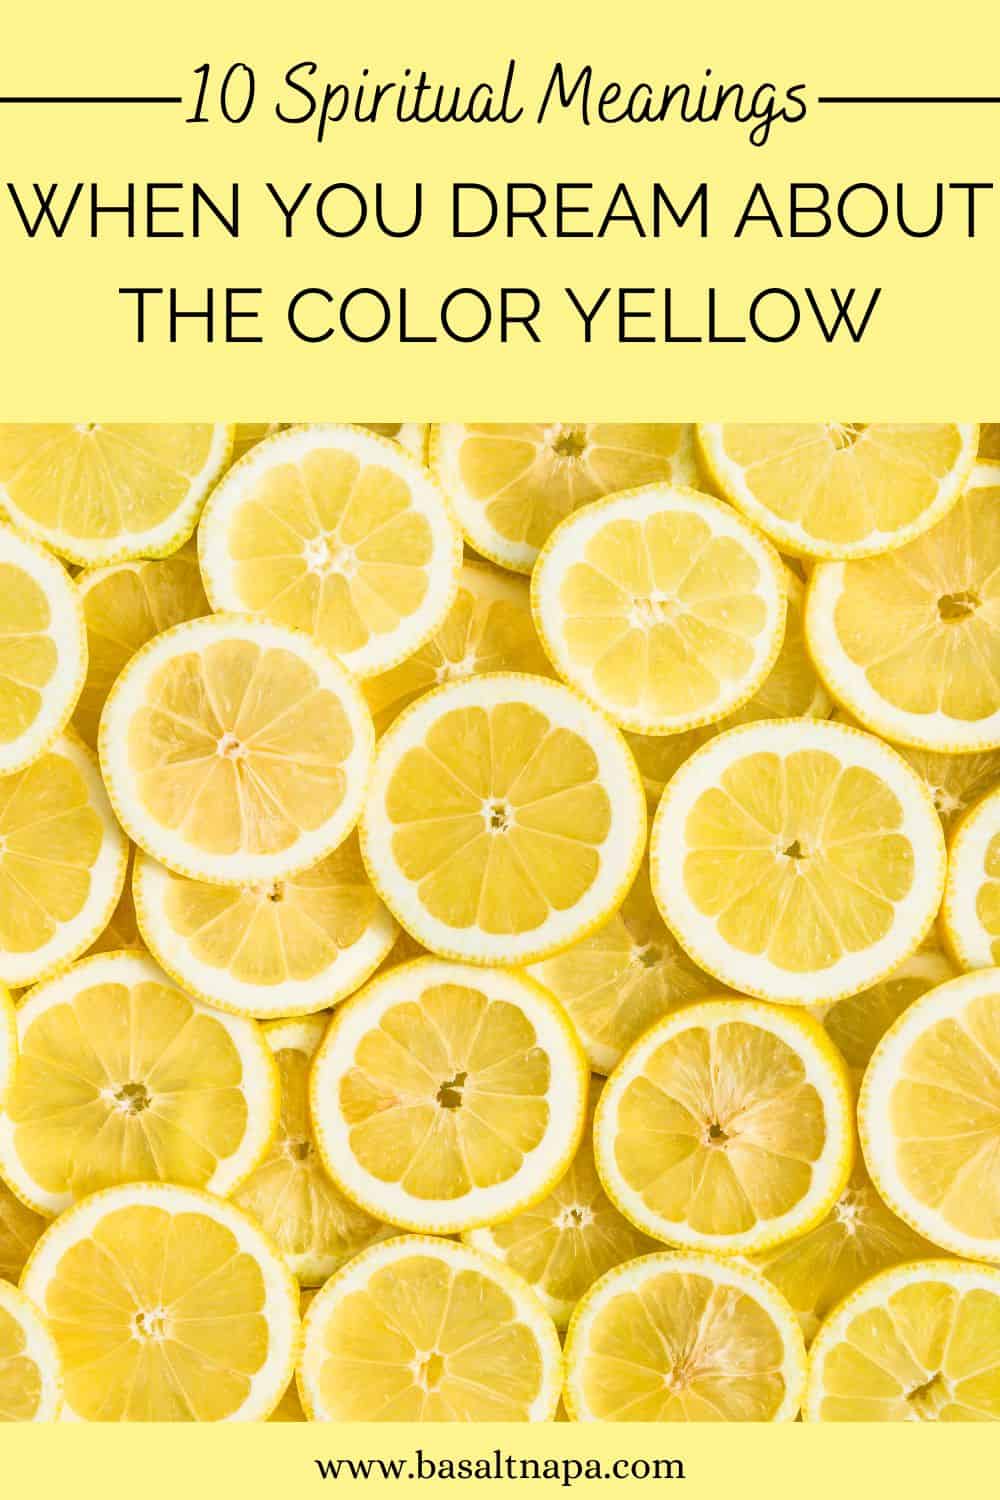 10 Spiritual Meanings When You Dream About The Color Yellow